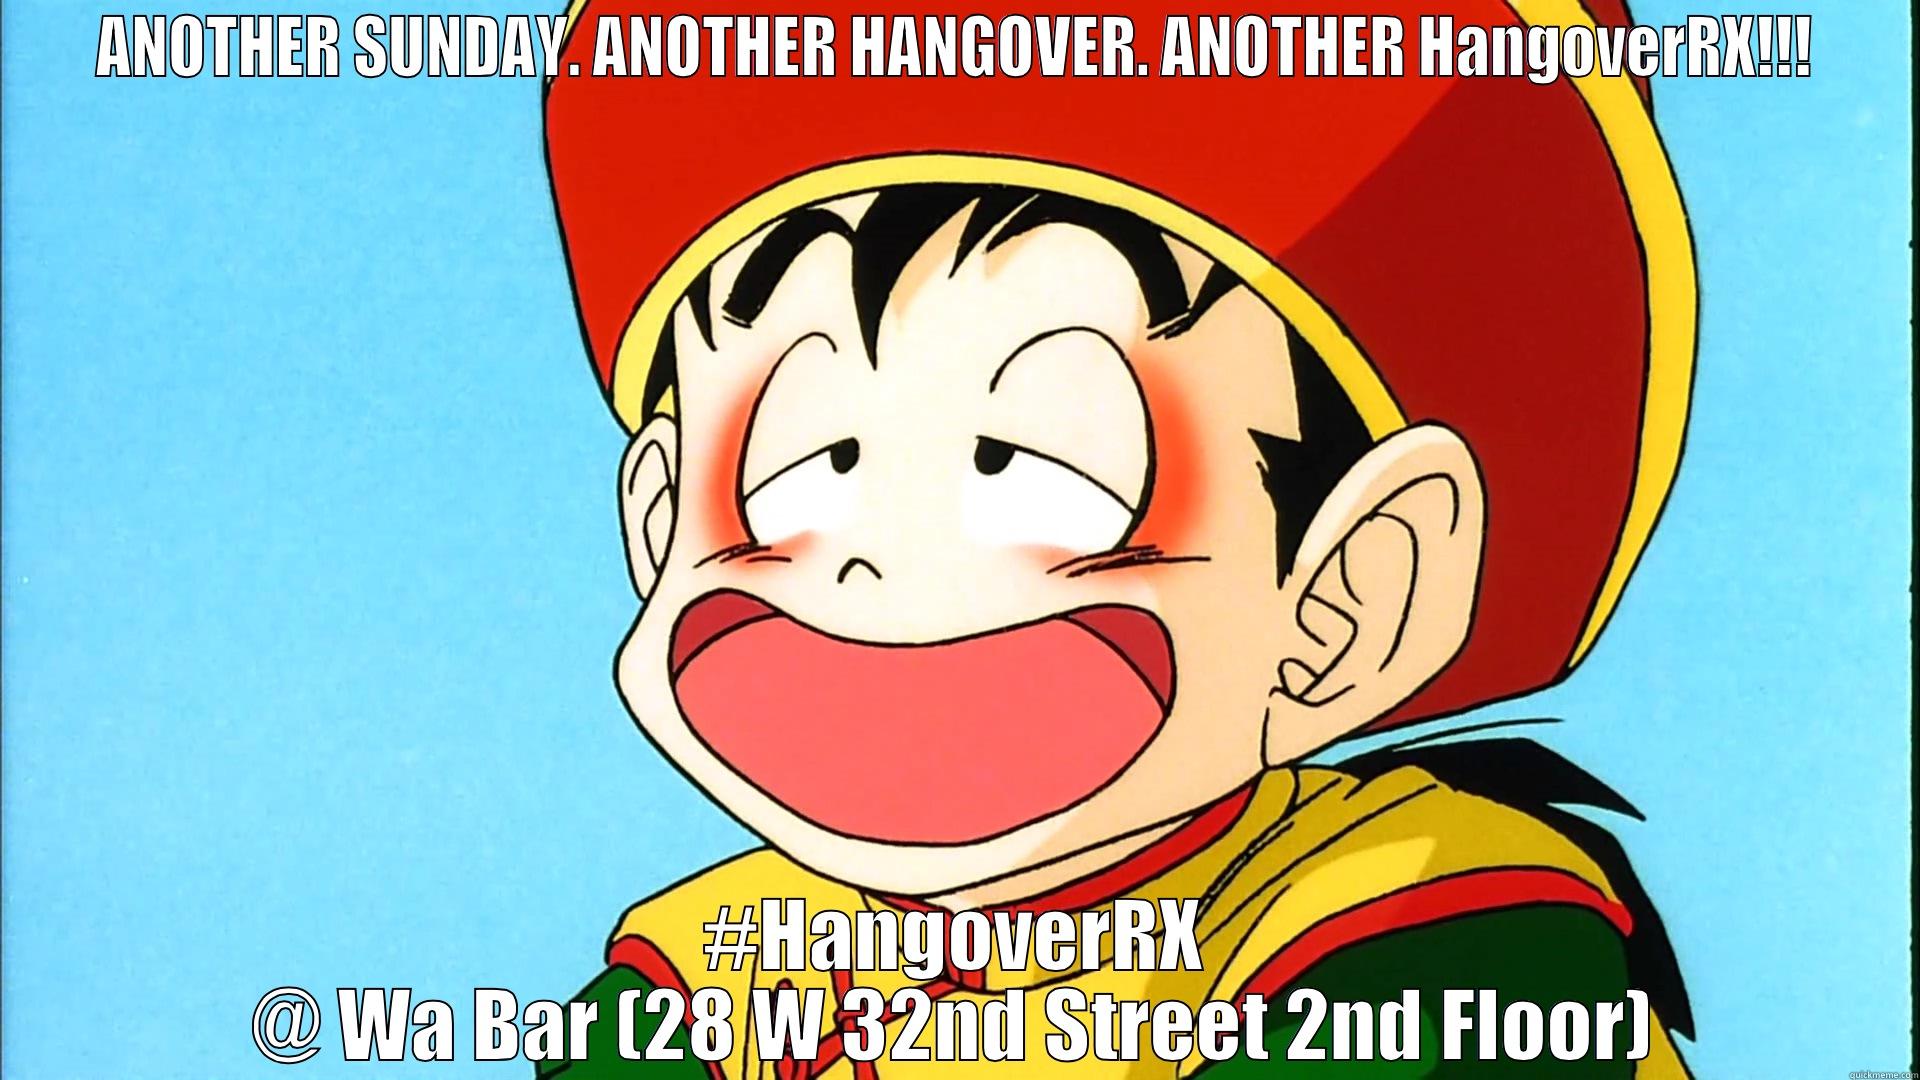 DRUNK GOHAN - ANOTHER SUNDAY. ANOTHER HANGOVER. ANOTHER HANGOVERRX!!! #HANGOVERRX @ WA BAR (28 W 32ND STREET 2ND FLOOR) Misc